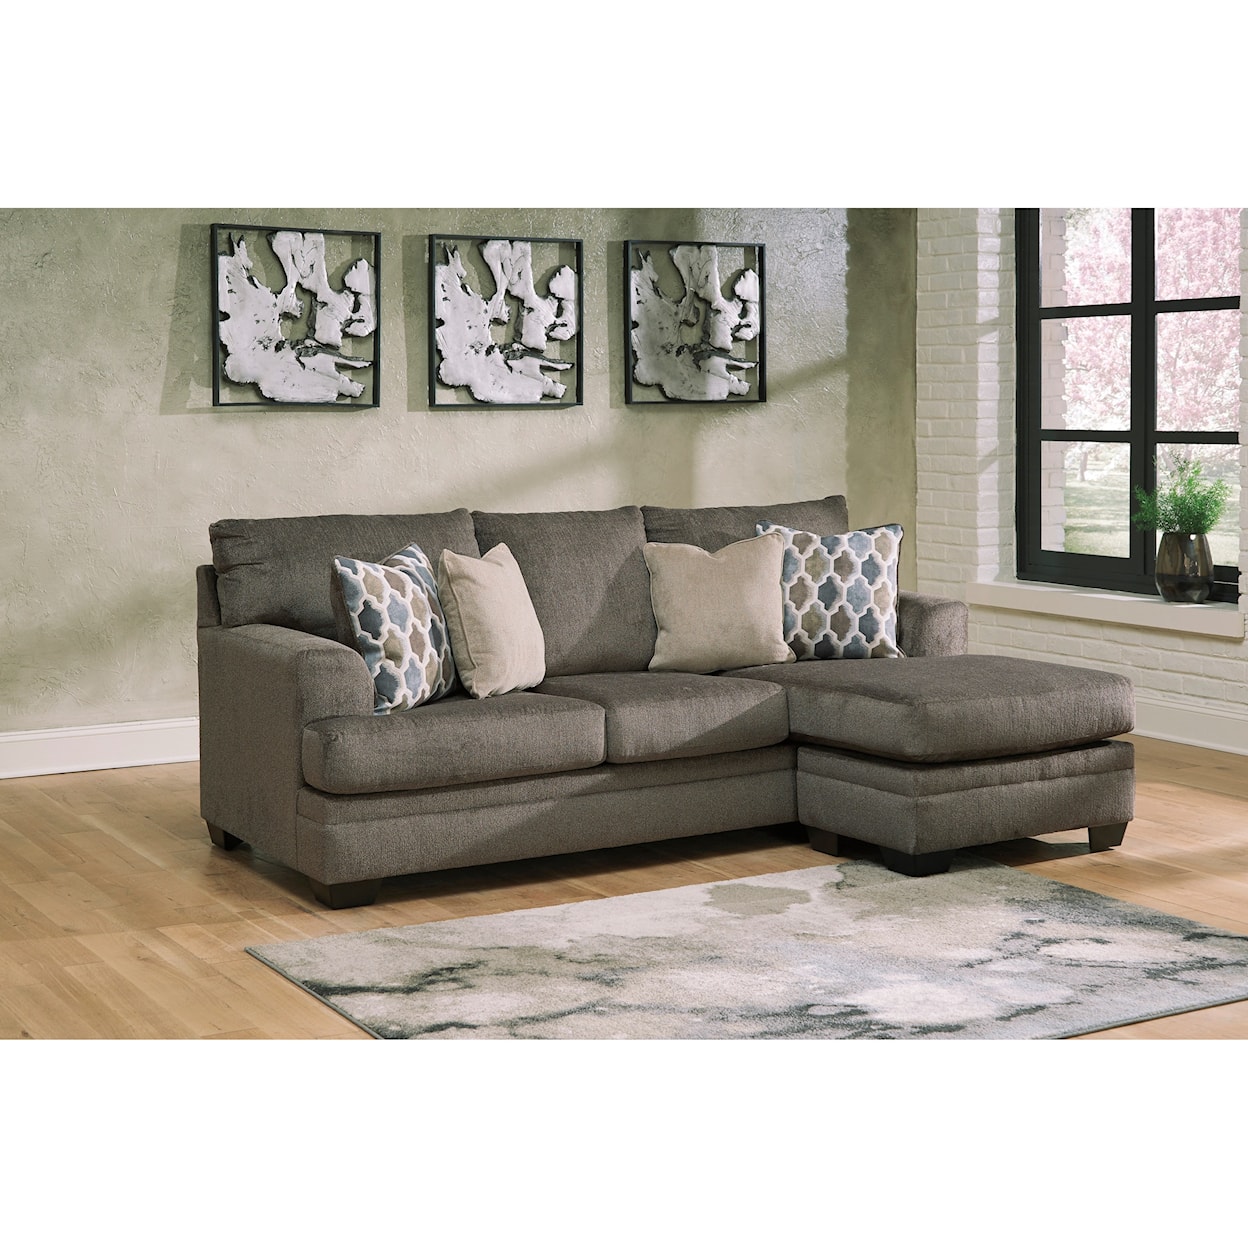 Signature Design by Ashley Dorsten Sofa with Chaise